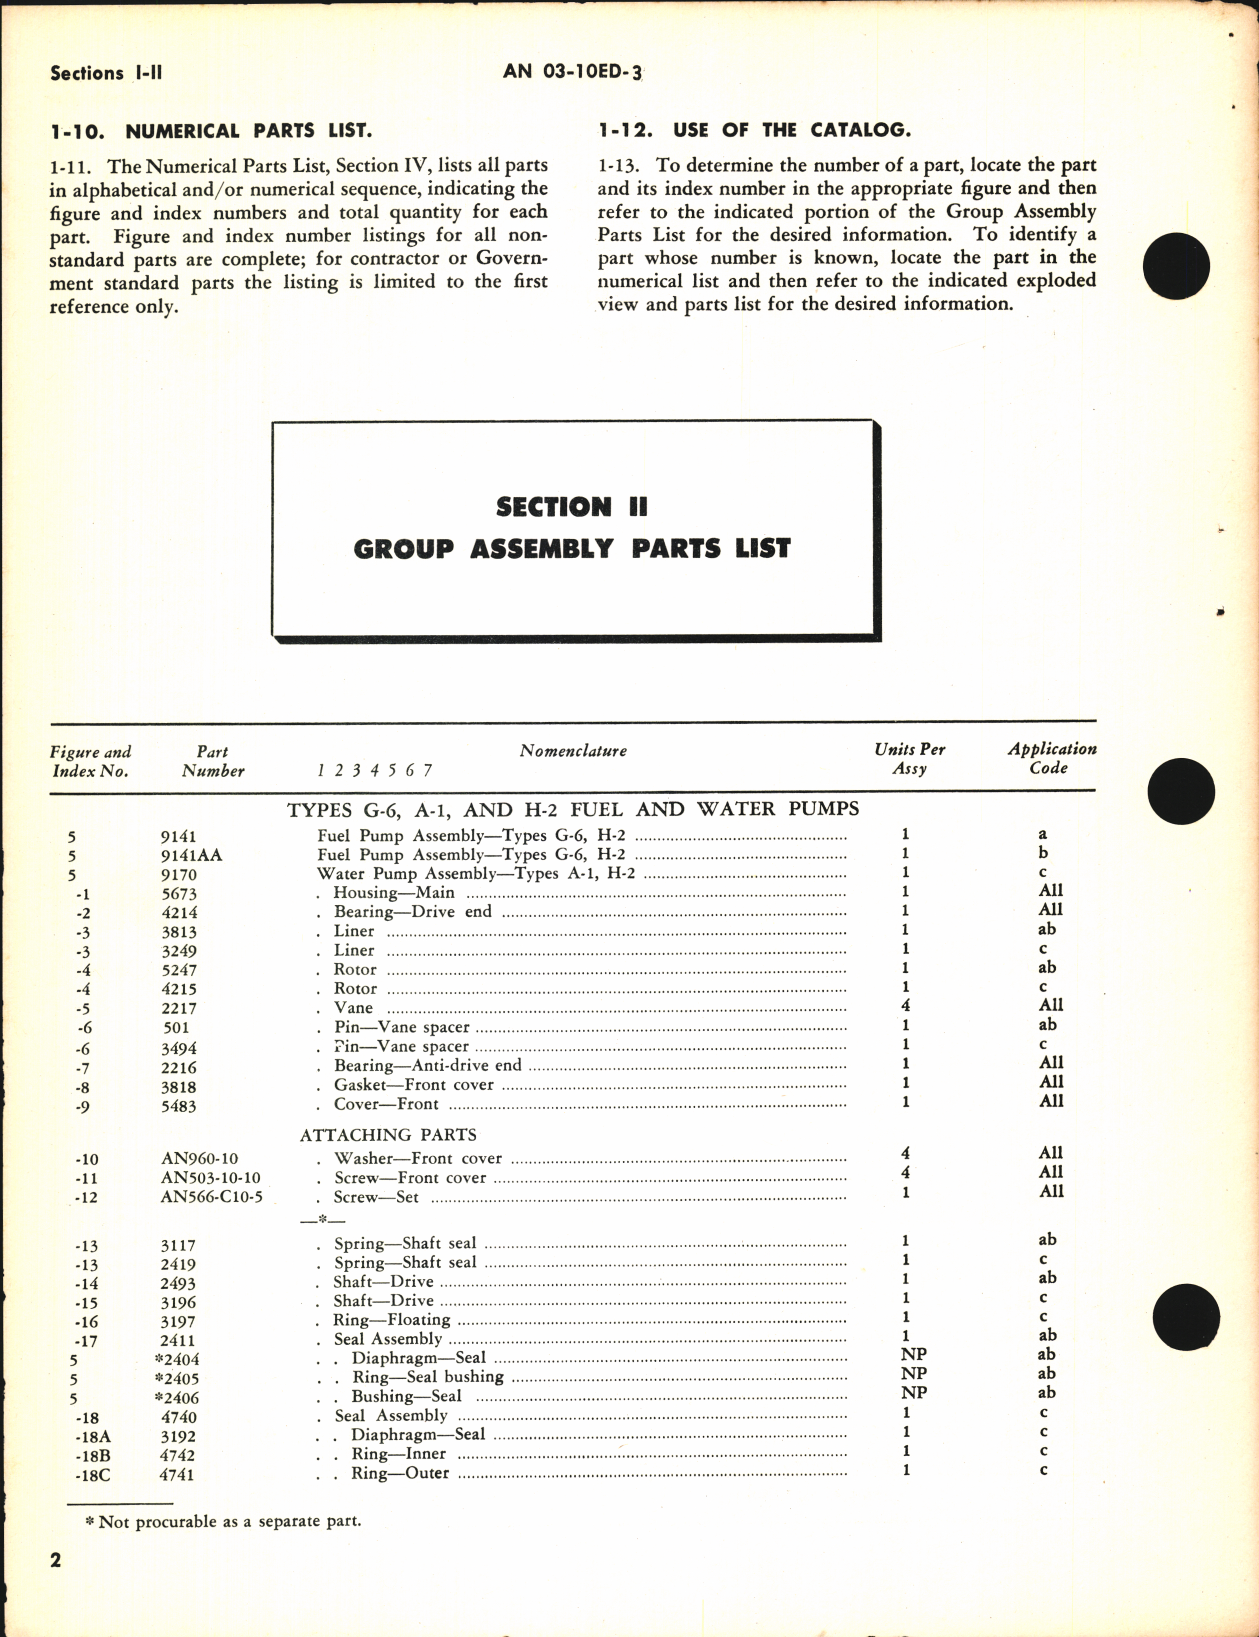 Sample page 6 from AirCorps Library document: Parts Catalog for Fuel and Water Pumps